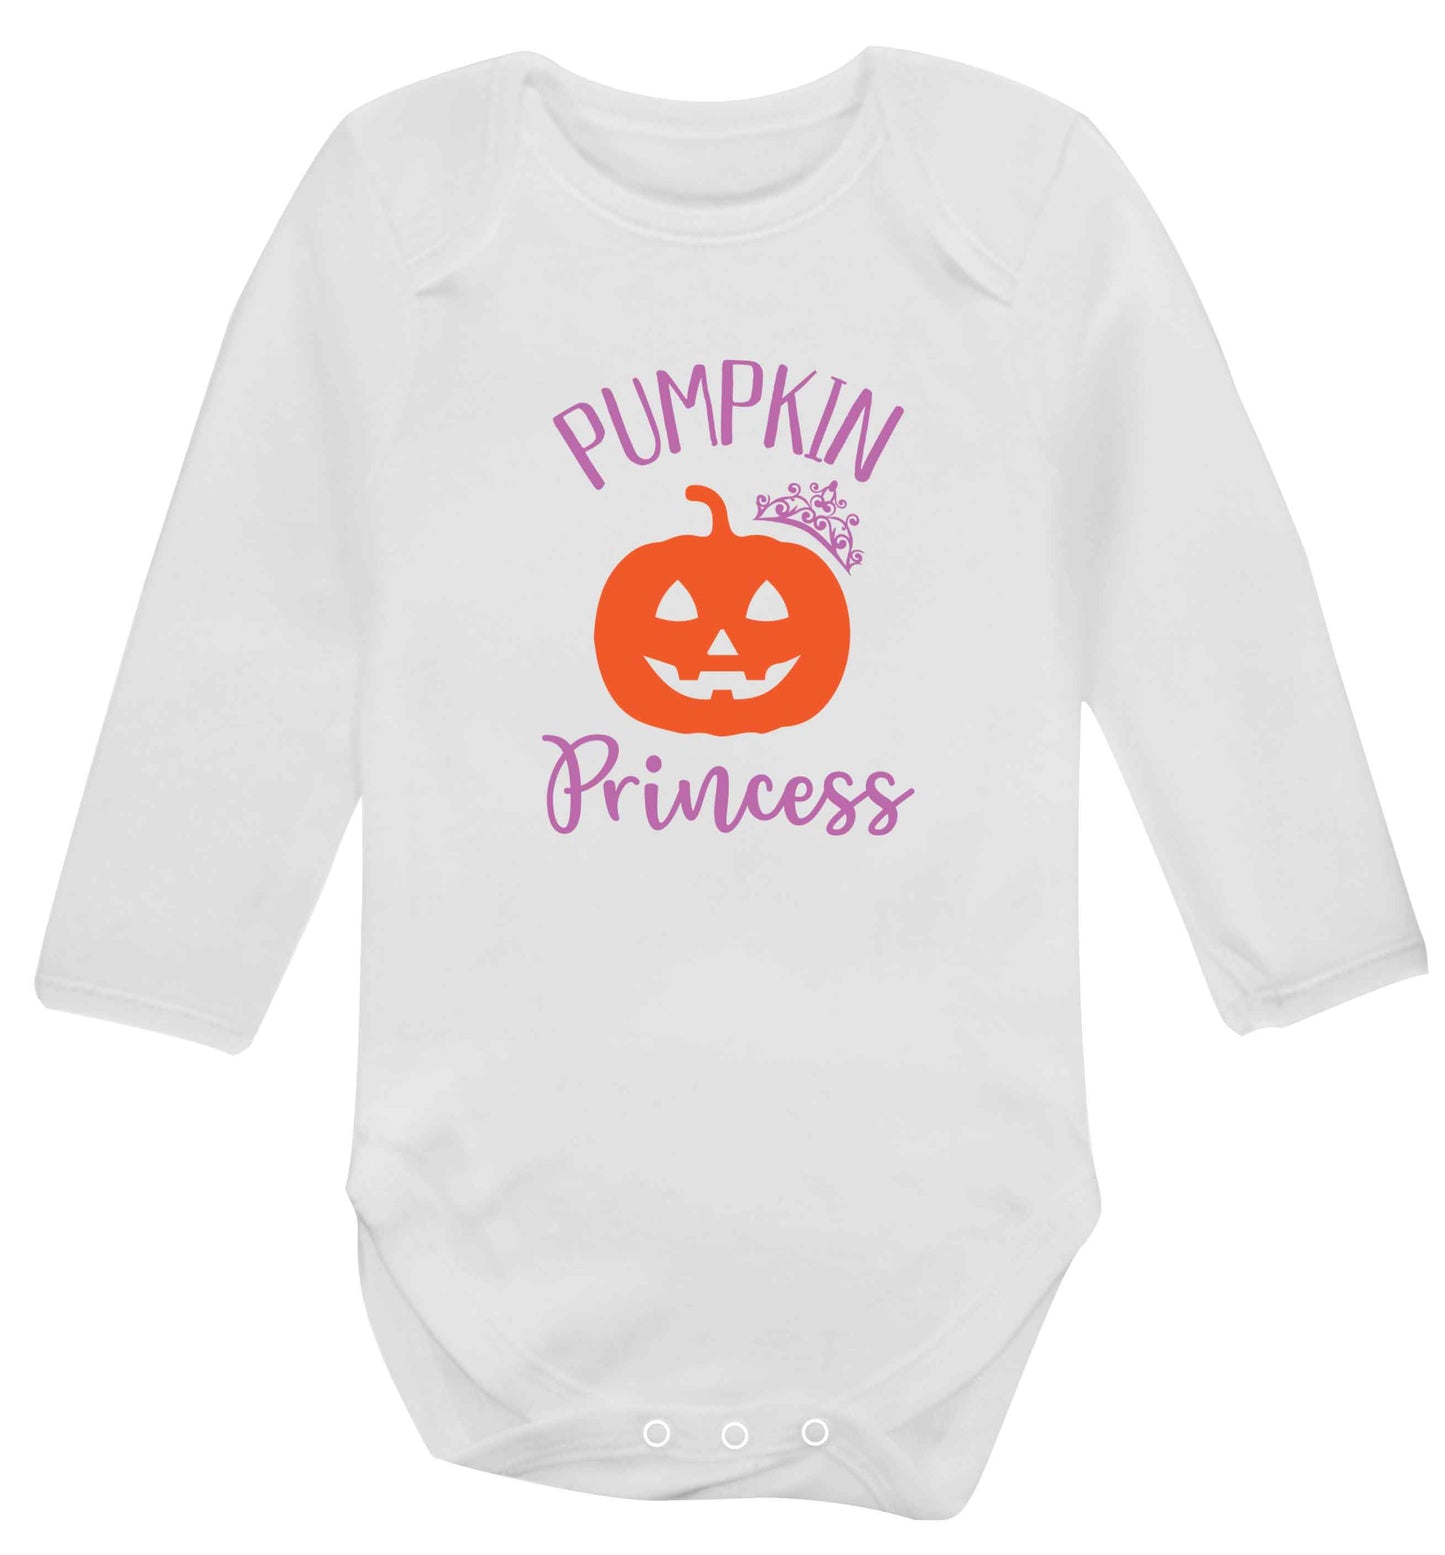 Happiness Pumpkin Spice baby vest long sleeved white 6-12 months